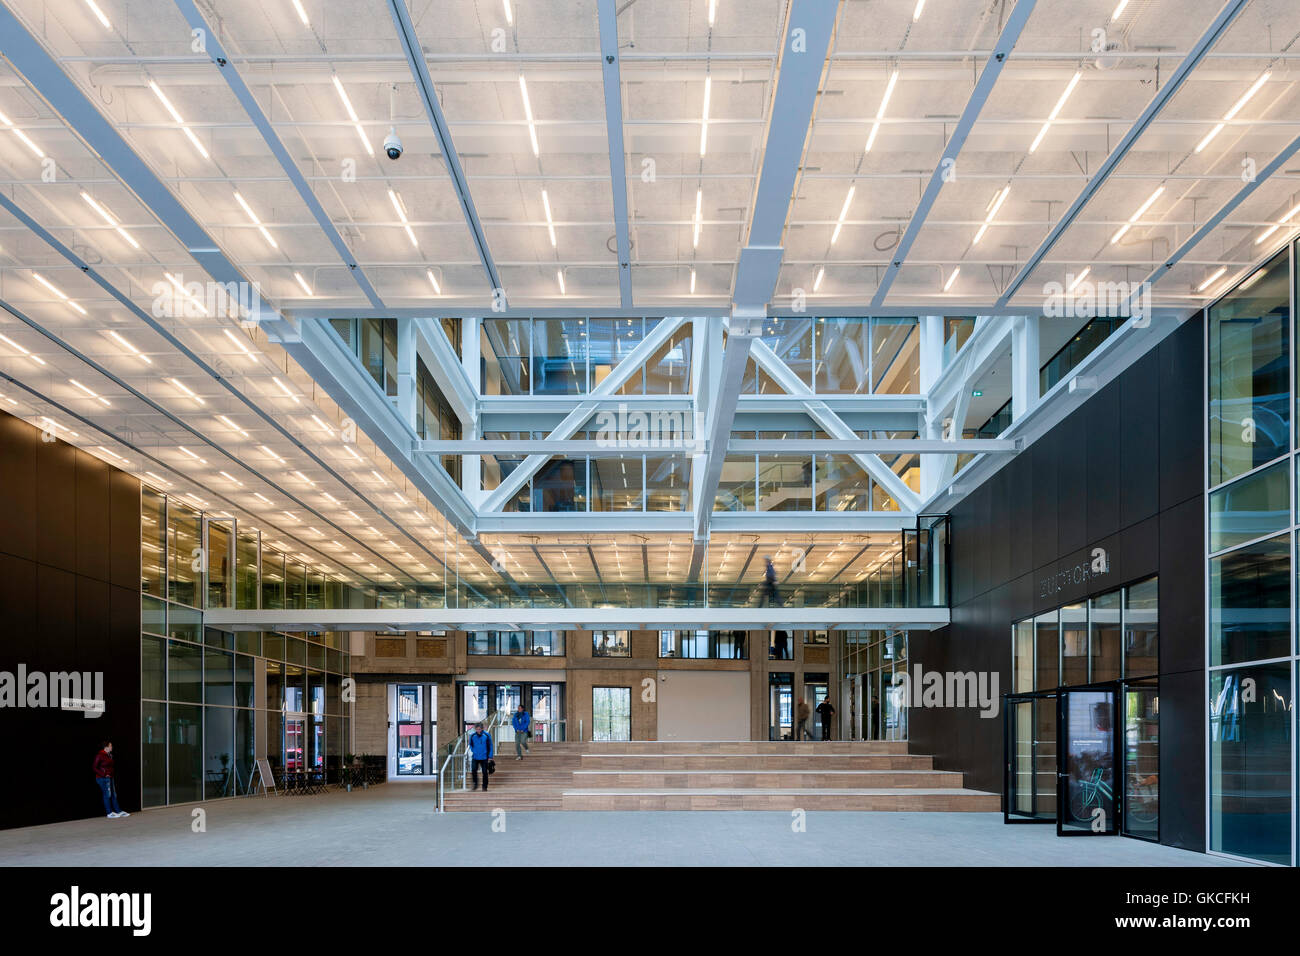 View of main entrance and canopied plaza. Timmerhuis, Rotterdam, Netherlands. Architect: OMA Rem Koolhaas, 2015. Stock Photo